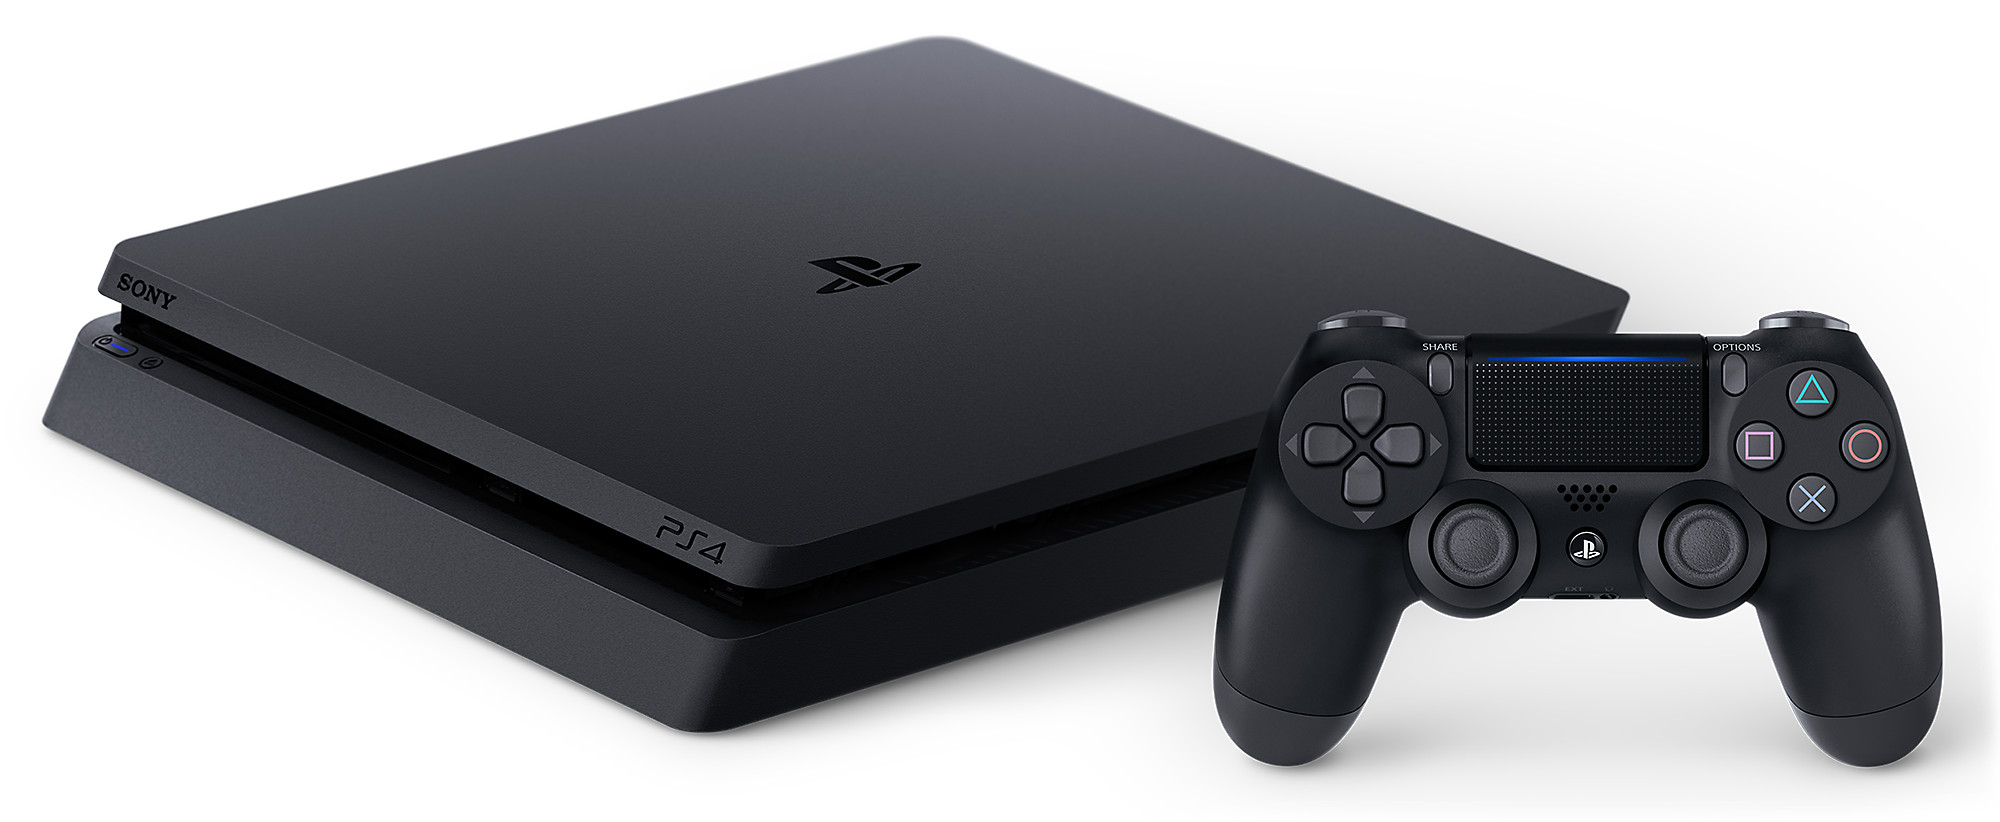 Next PlayStation console not expected before April 2020